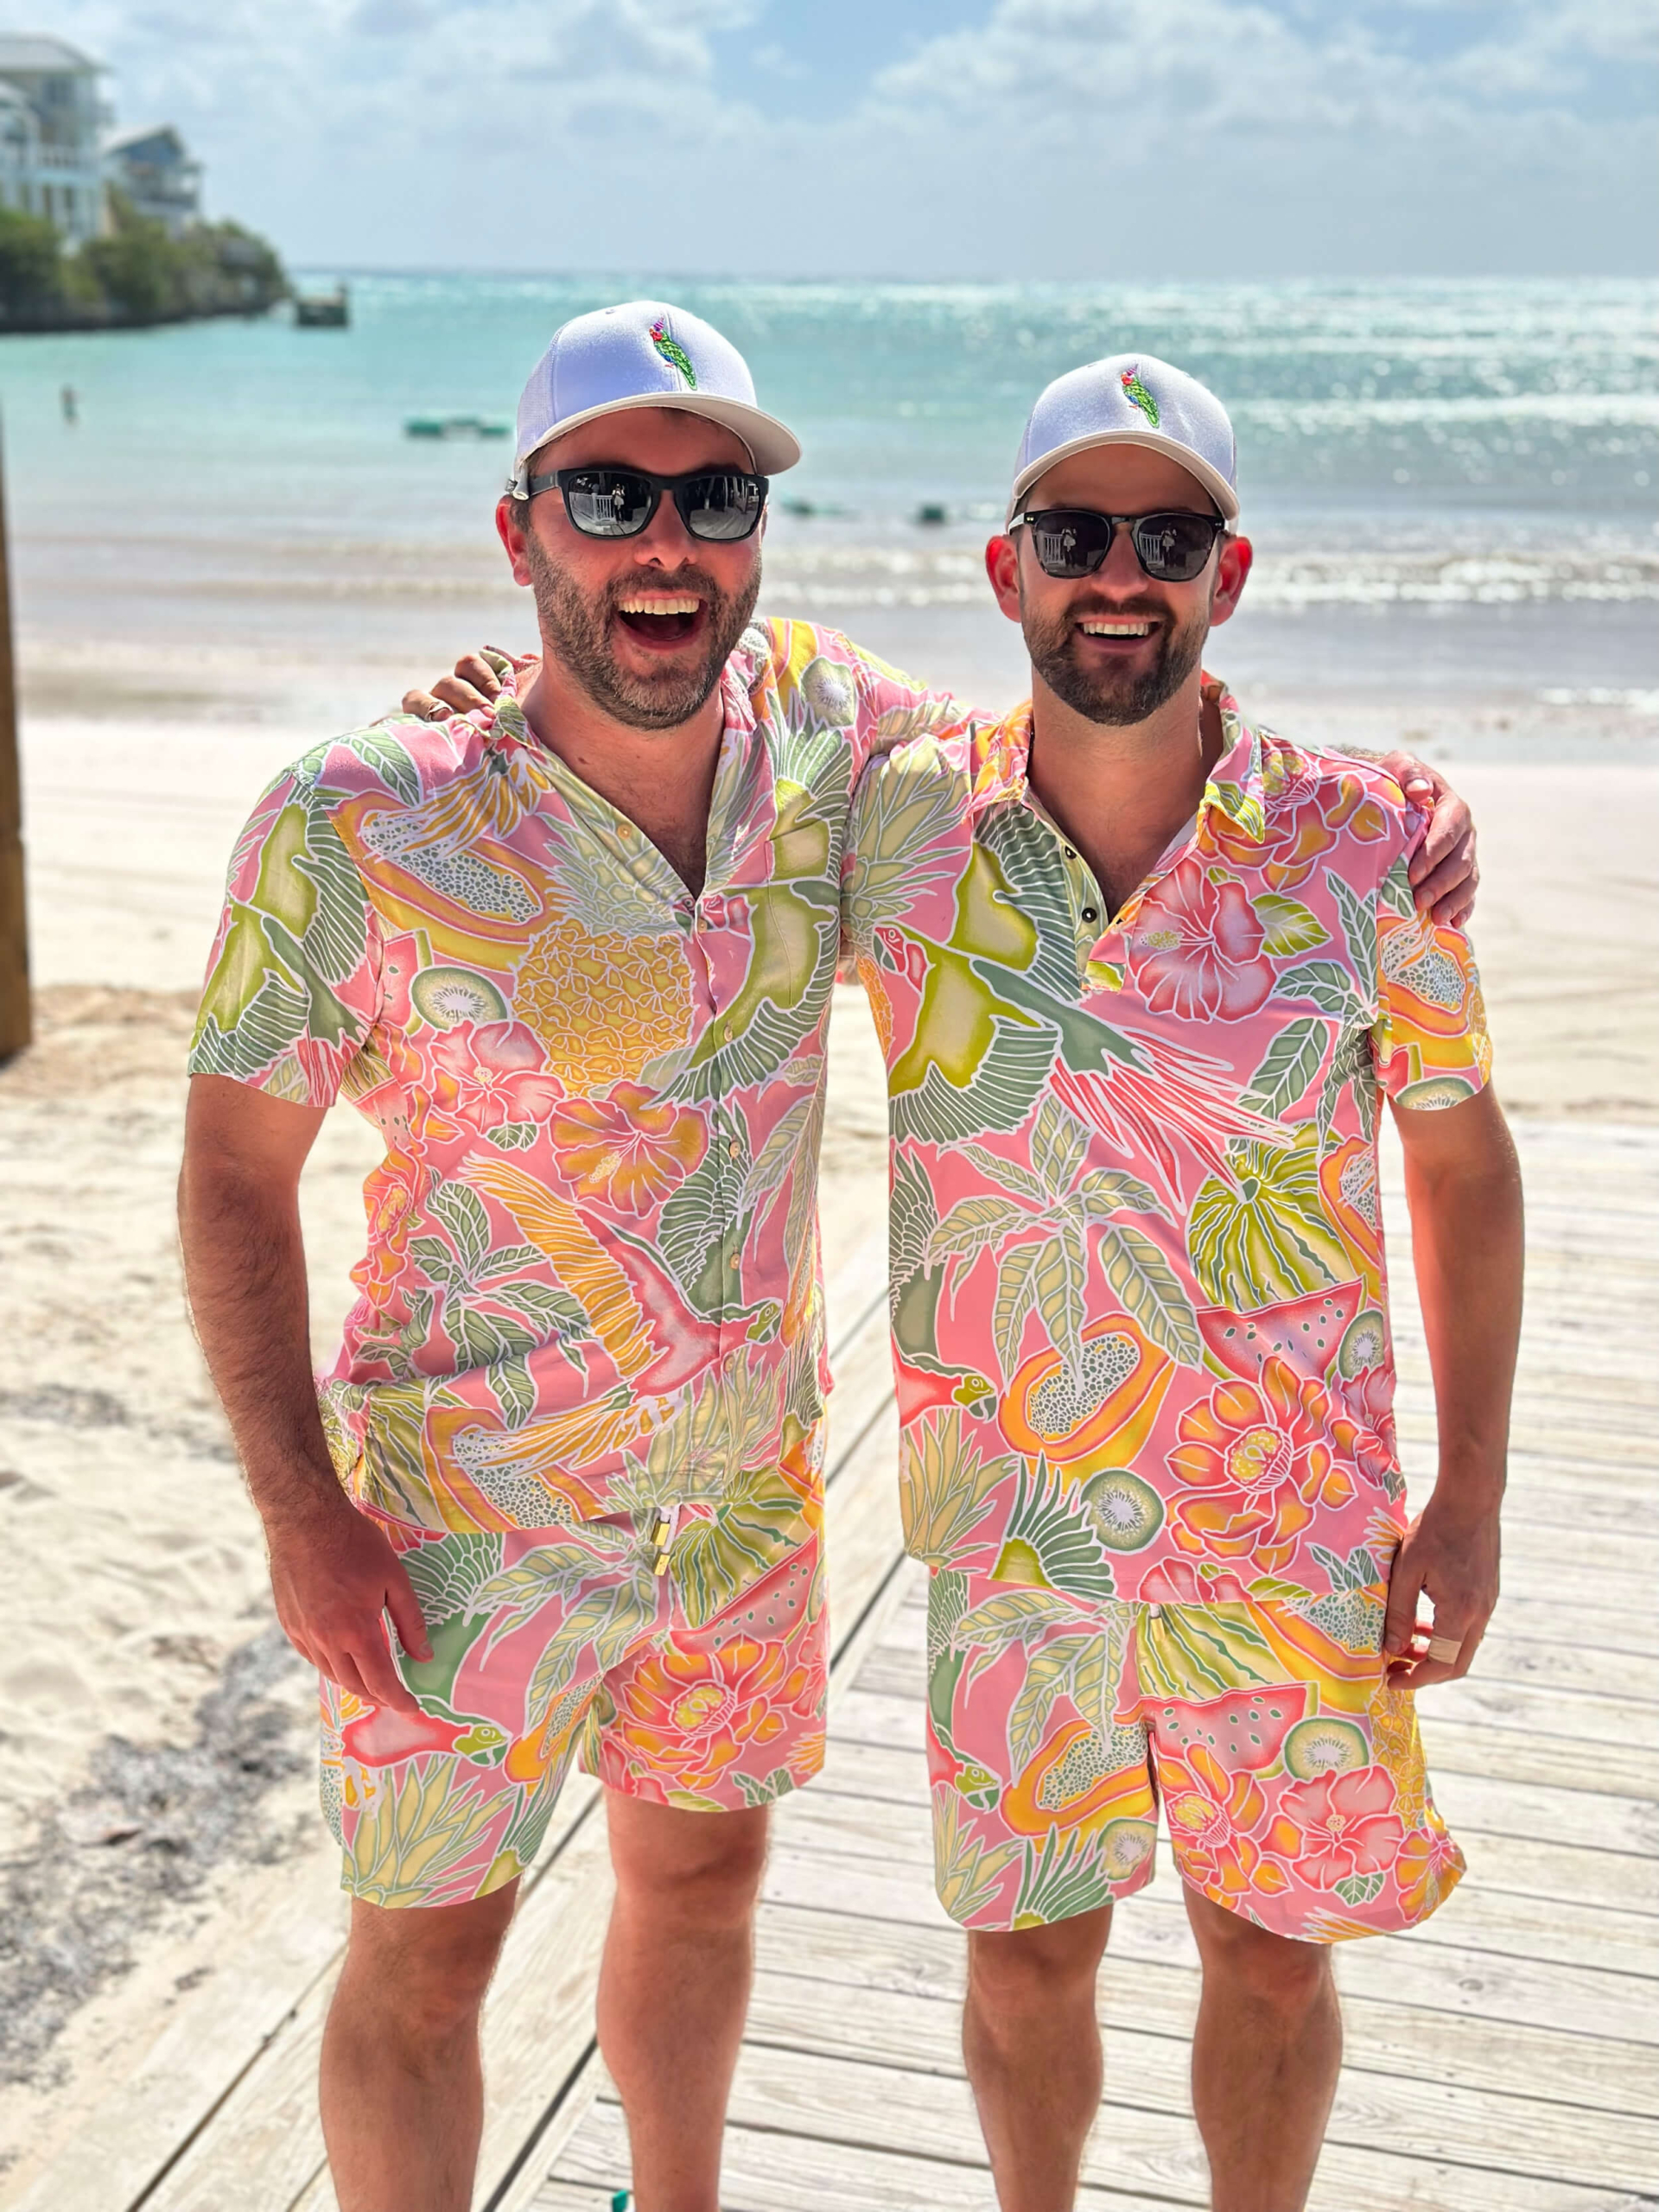 Two Abaco Club members posing and smiling with matching tropical clothes